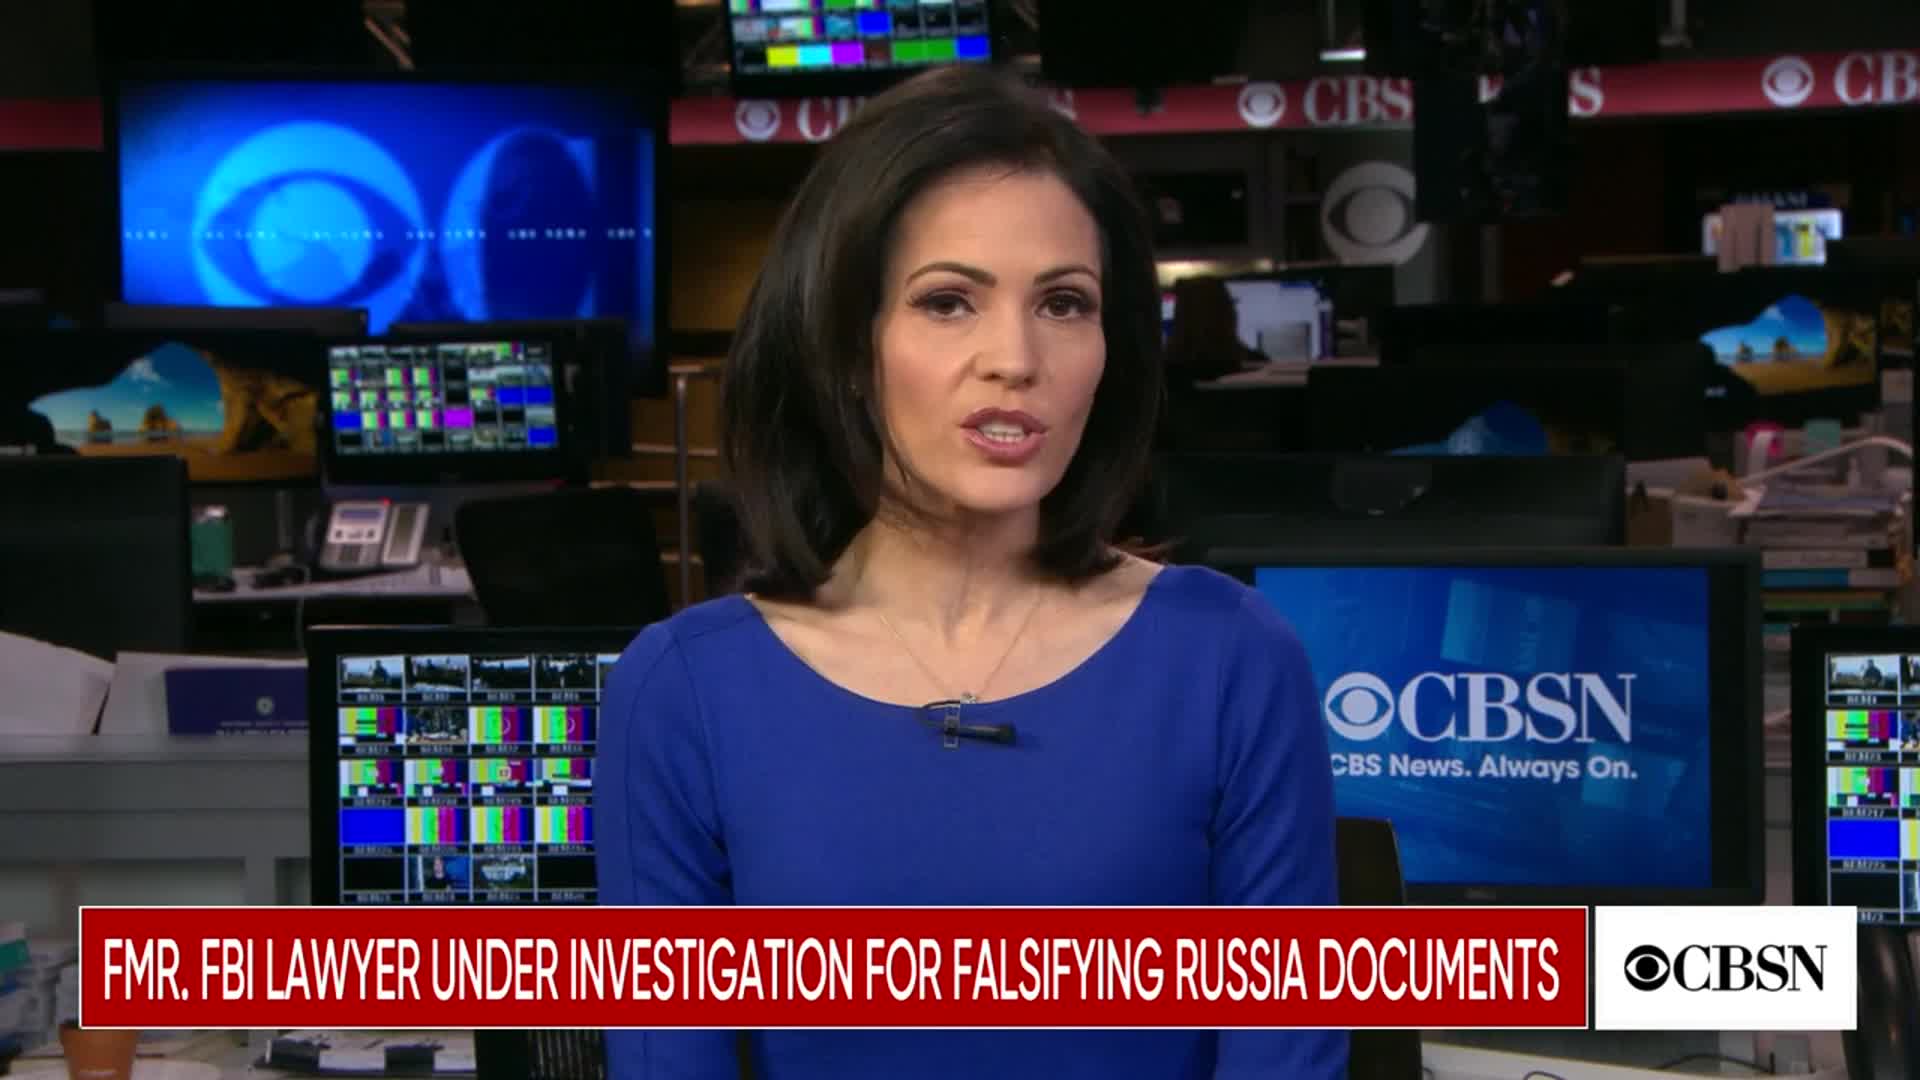 Former FBI lawyer under criminal investigation for allegedly altering documents related to 2016 Russia investigation